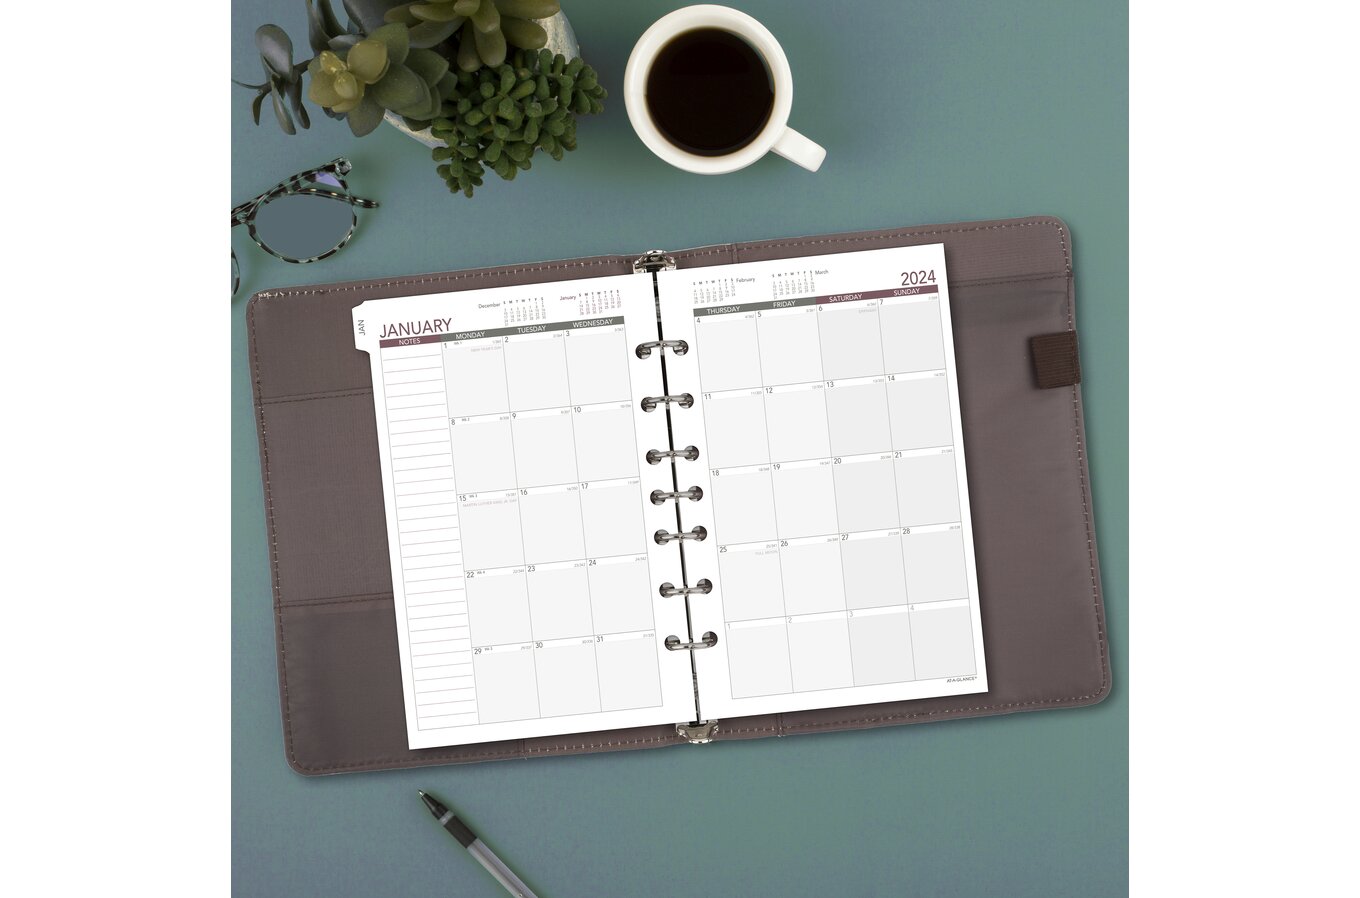 AT-A-GLANCE 2024 Weekly Planner Refill, Loose-Leaf, Desk Size, 5 1/2 x 8 1/2, Refillable Planners & Refills